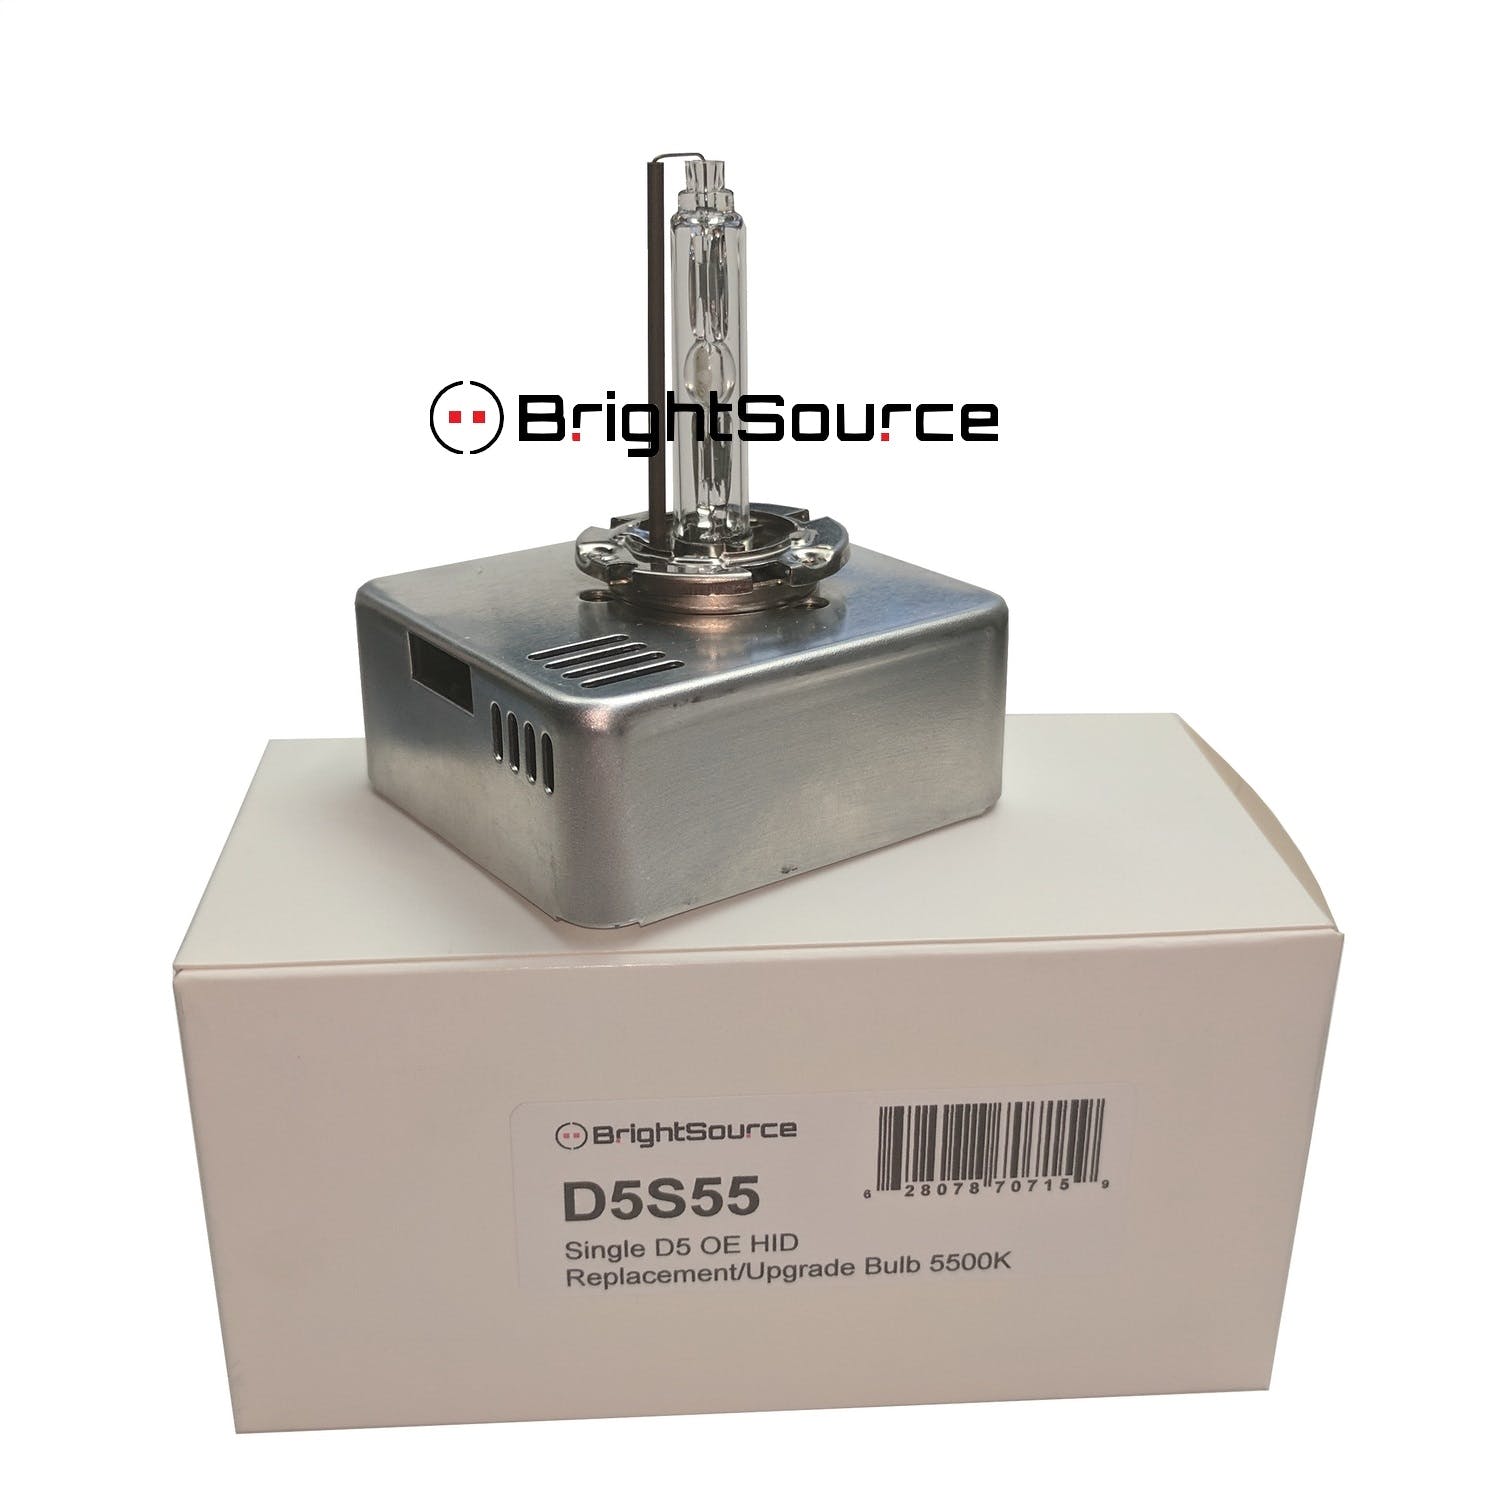 BrightSource D5S55 Single D5 OE Replacement/Upgrade Bulb 5500K